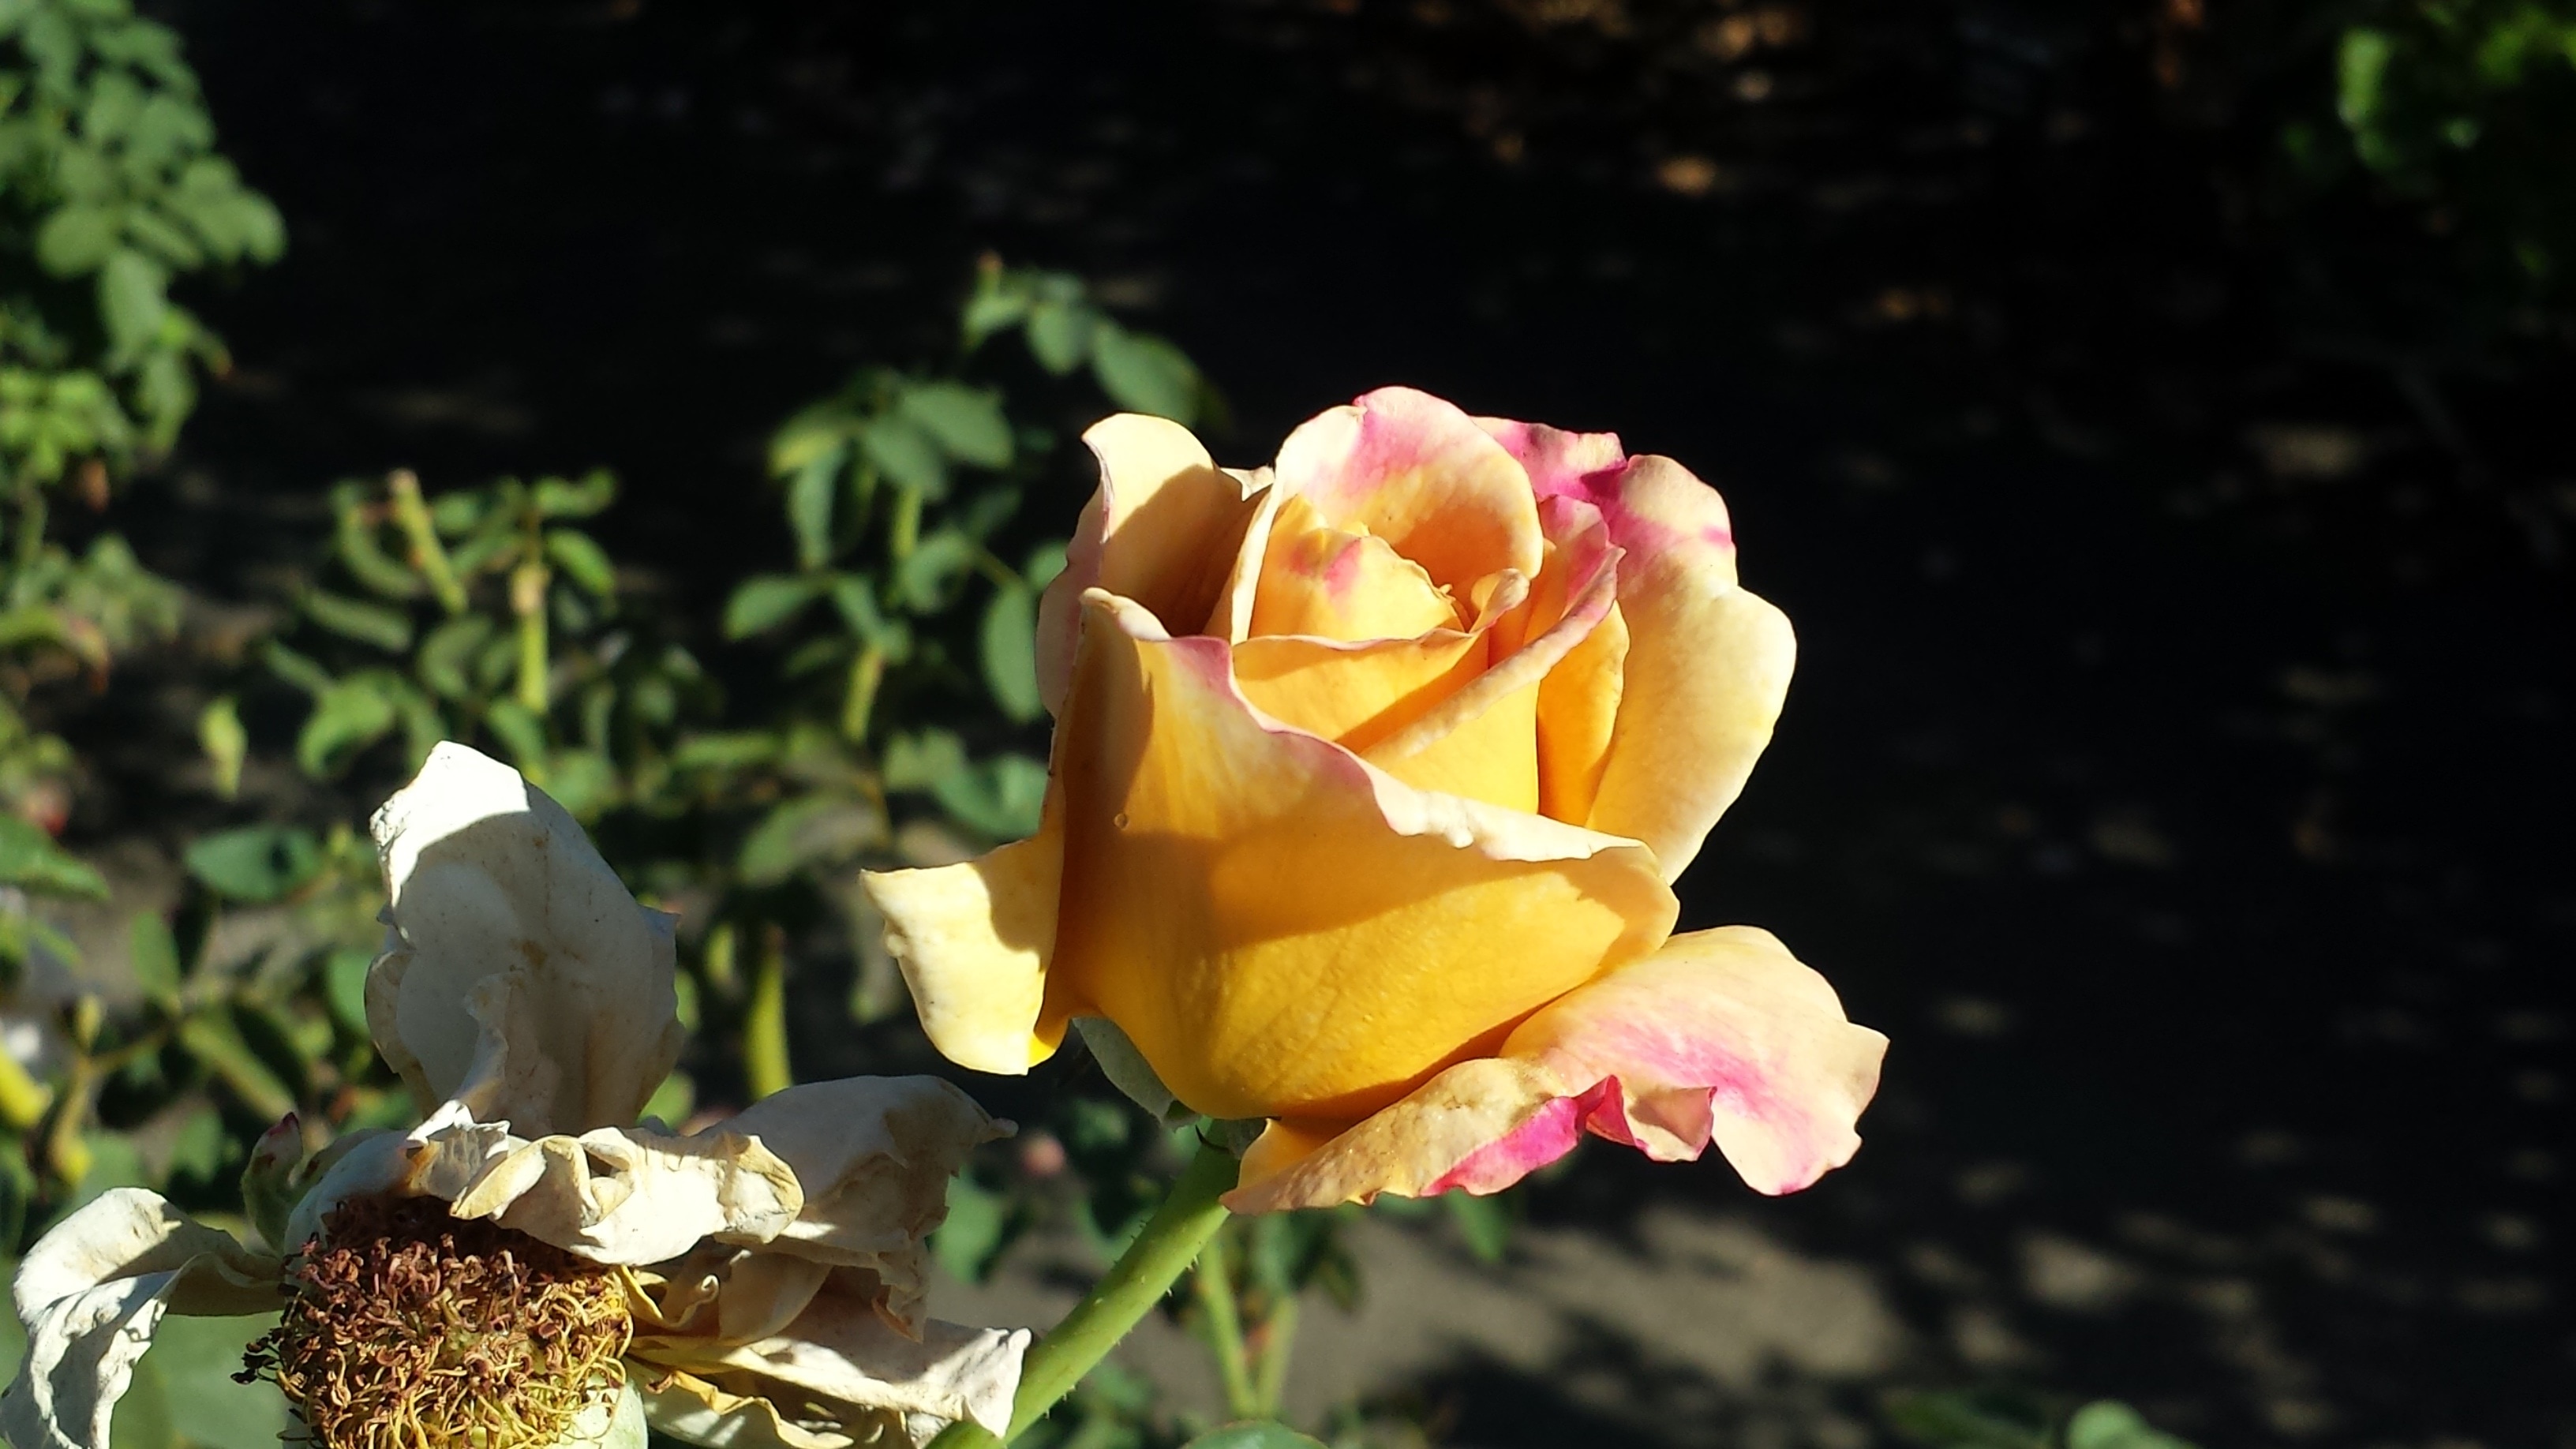 yellow pink and white rose flower